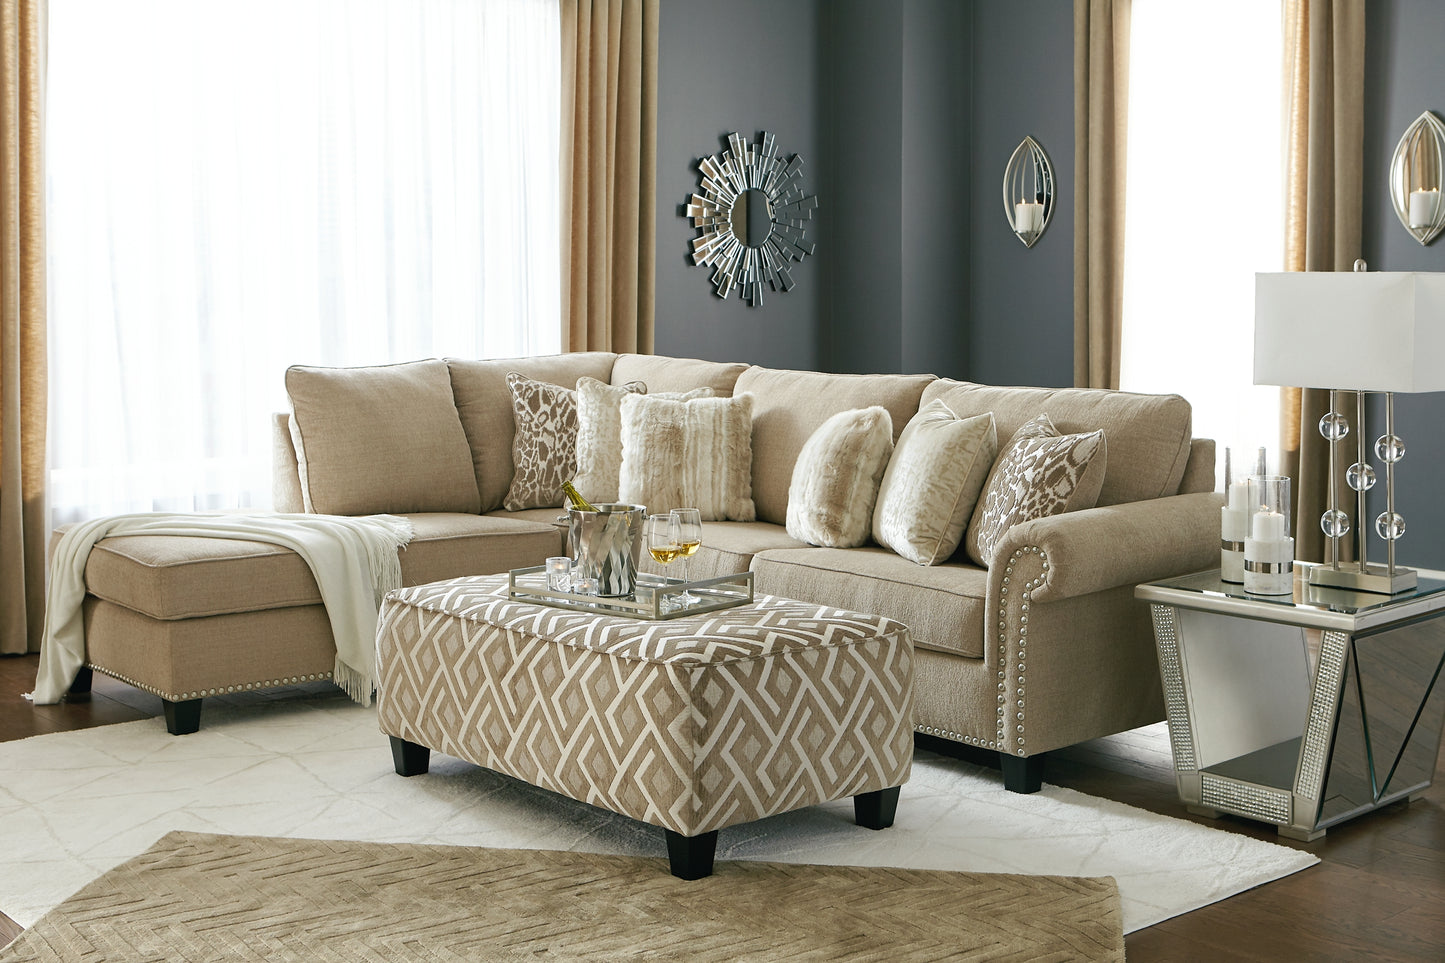 Dovemont 2-Piece Sectional with Ottoman